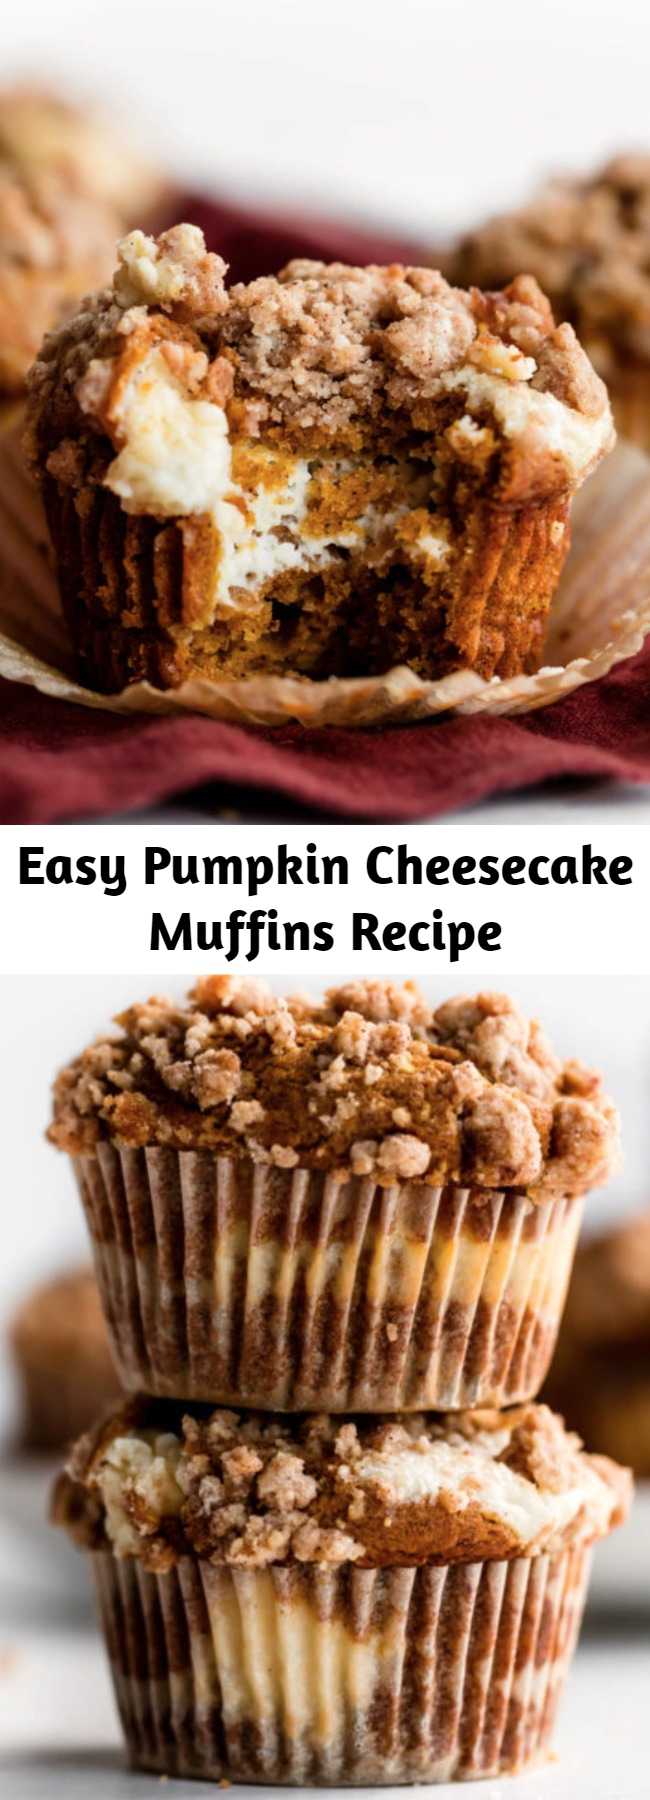 Easy Pumpkin Cheesecake Muffins Recipe - Like a delicious pumpkin roll, these pumpkin cheesecake muffins combine perfectly spiced pumpkin muffins with cream cheese filling. Top the muffins with brown sugar crumb cake topping and you have an absolutely irresistible pumpkin spice breakfast treat.